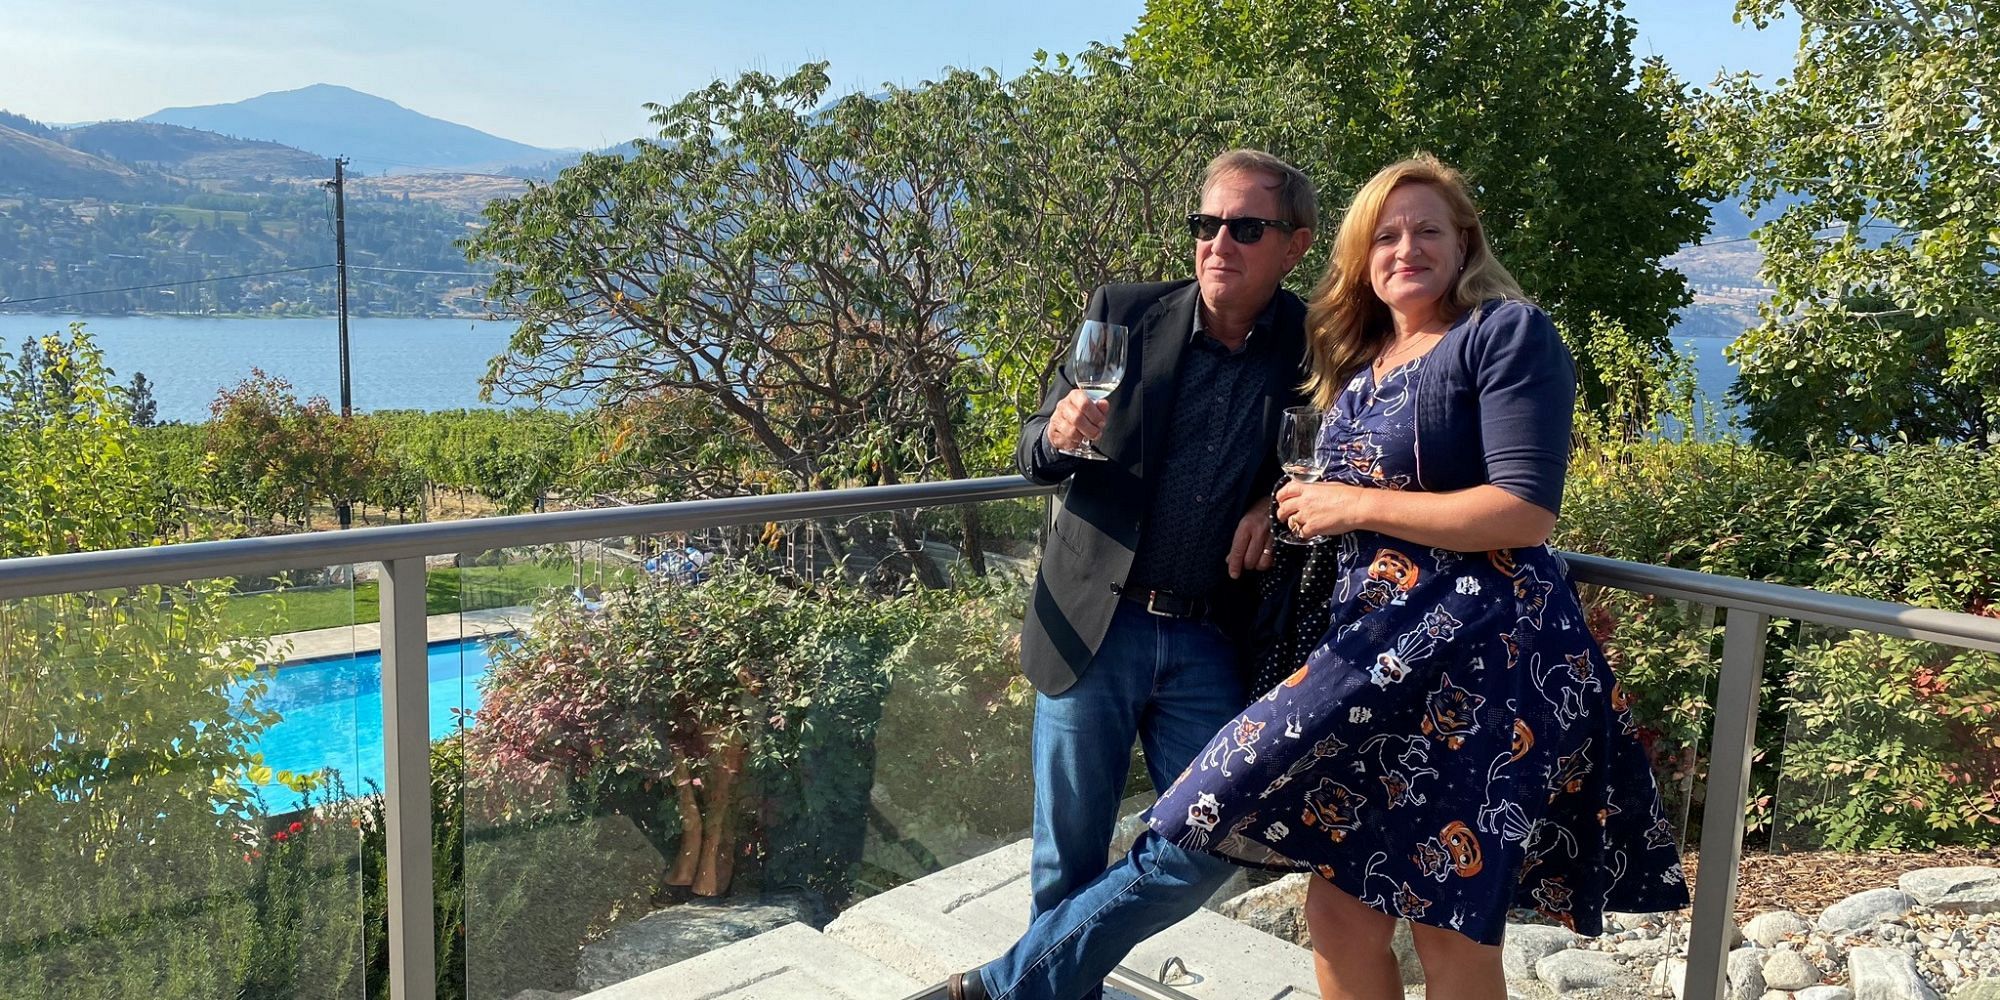 Couple Standing With Wine On The Patio At Blasted Church Vineyard Overlooking A Pool